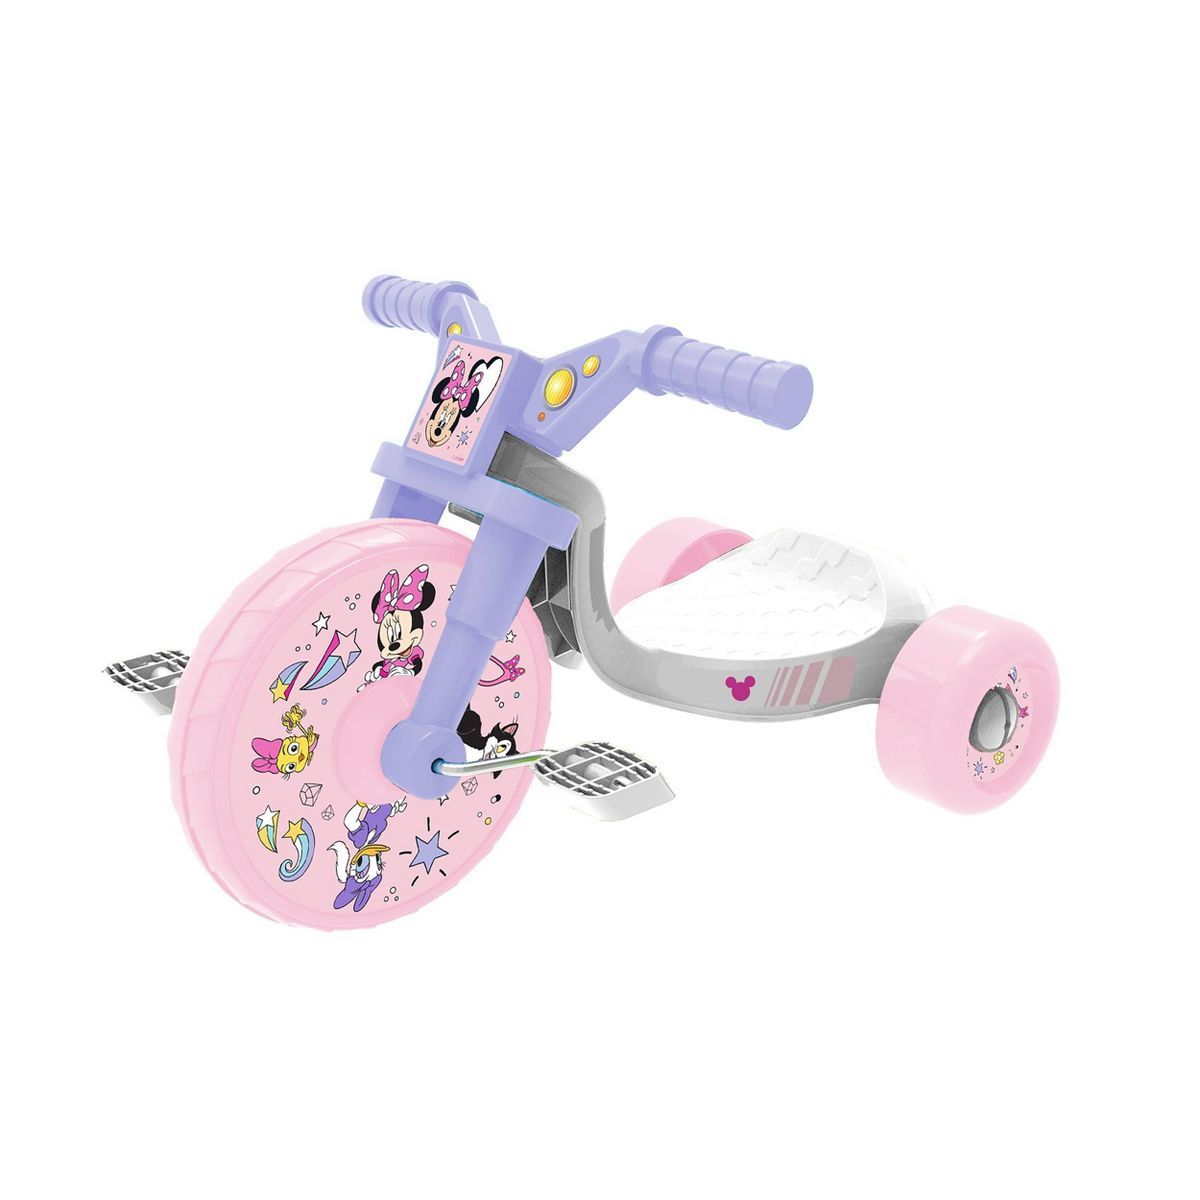 Minnie Mouse 10" Fly Wheel Kids' Tricycle with Electronic Sound - Pink/Purple | Target